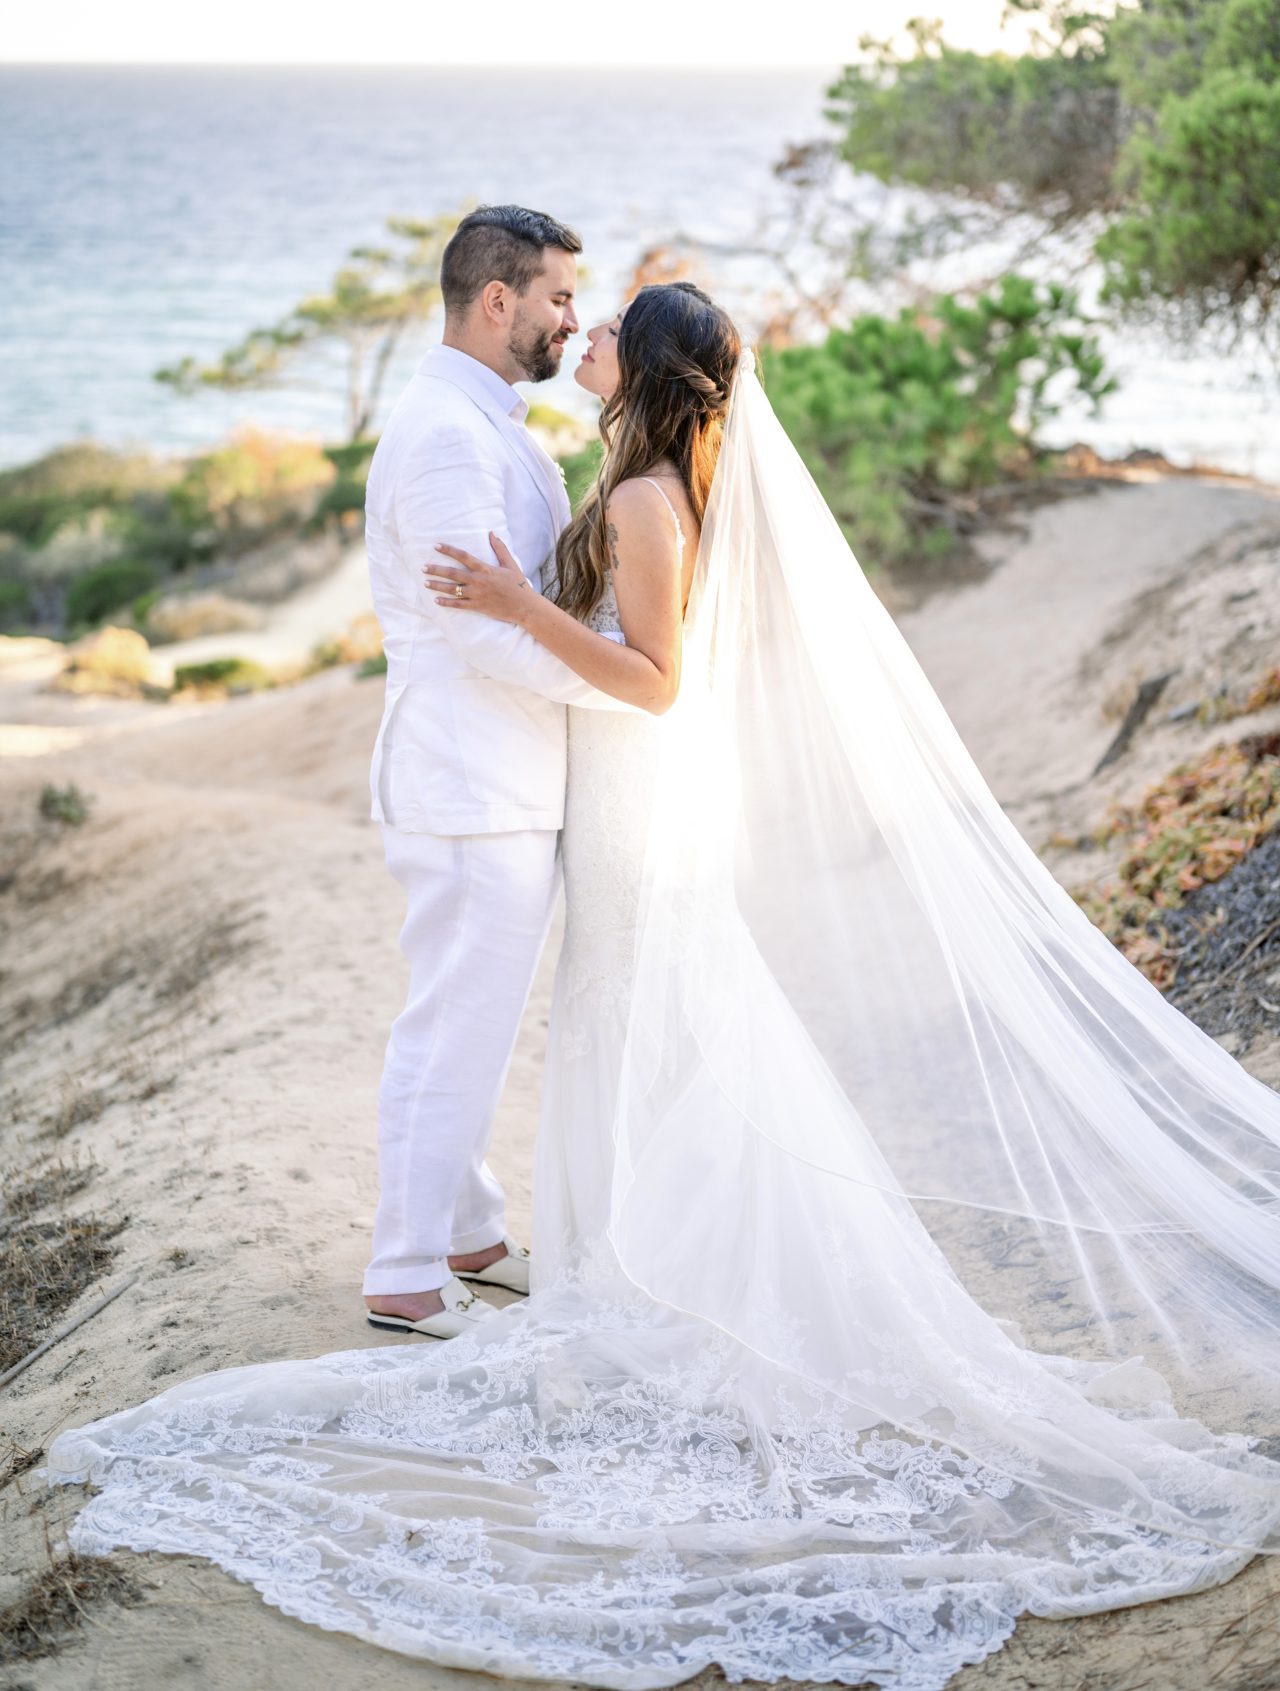 https://usercontent.one/wp/www.natalieandmaxphotofilms.com/wp-content/uploads/2023/09/W-Algarve-Natalie-and-Max-Photo-and-Films-IC-0799-new-1280x1691.jpg?media=1694090319